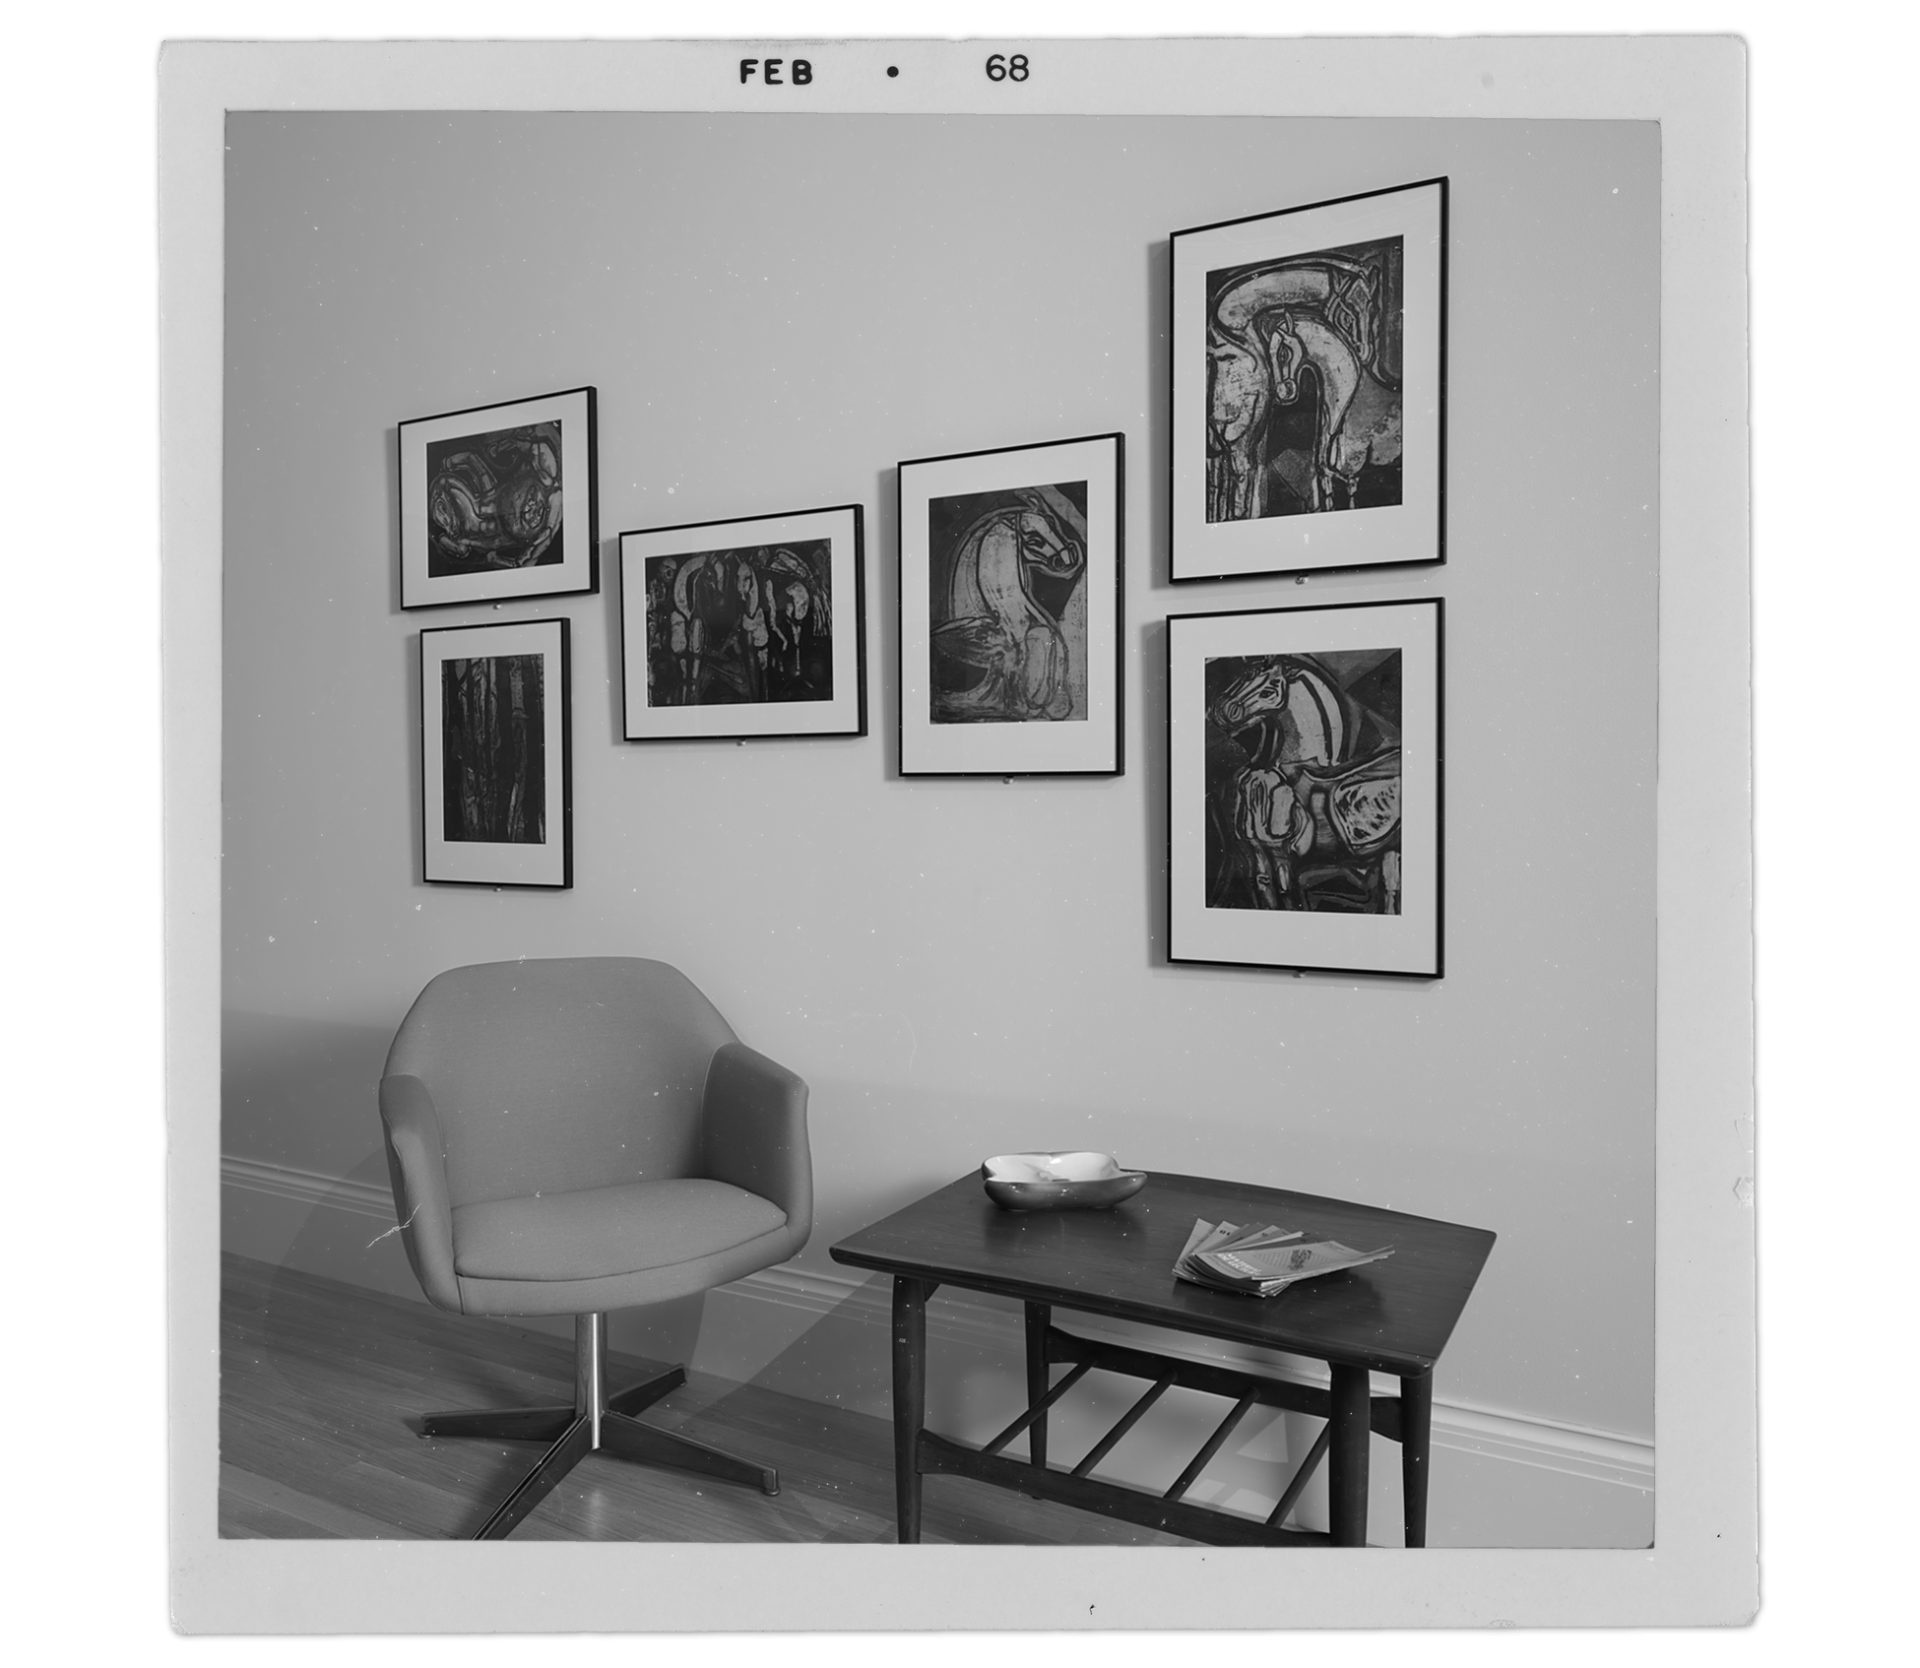 "Old" photograph of six Delia del Carril prints hanging on a wall above a midcentury chair and table